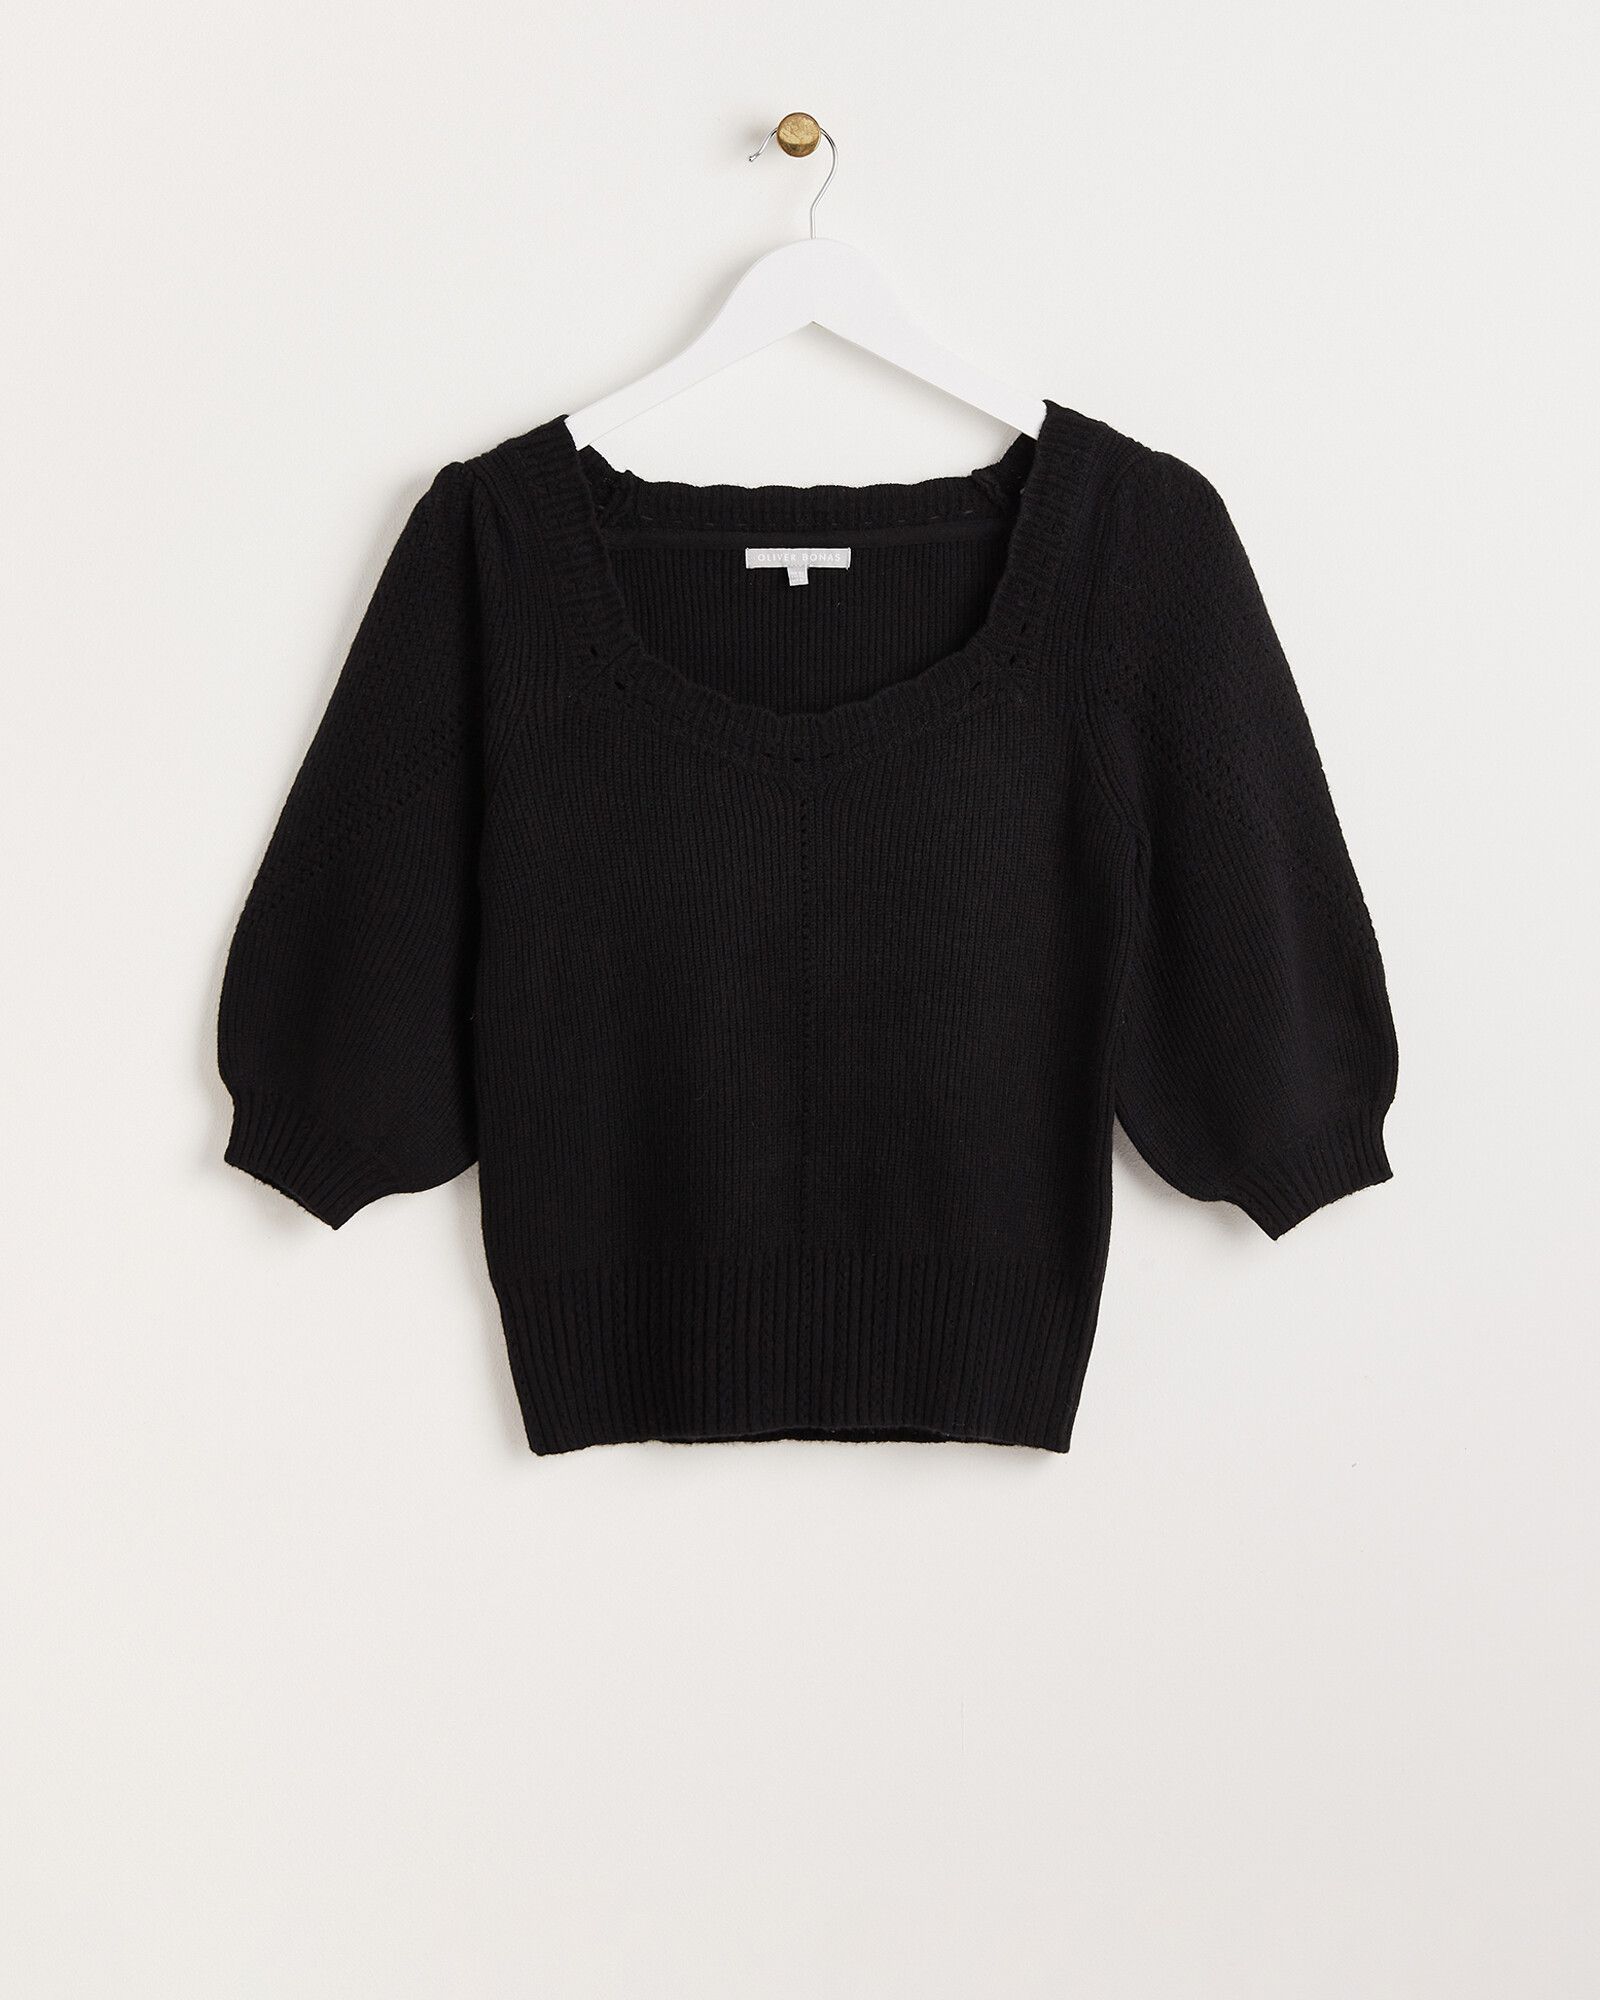 Scalloped Black Knitted Top | Oliver Bonas